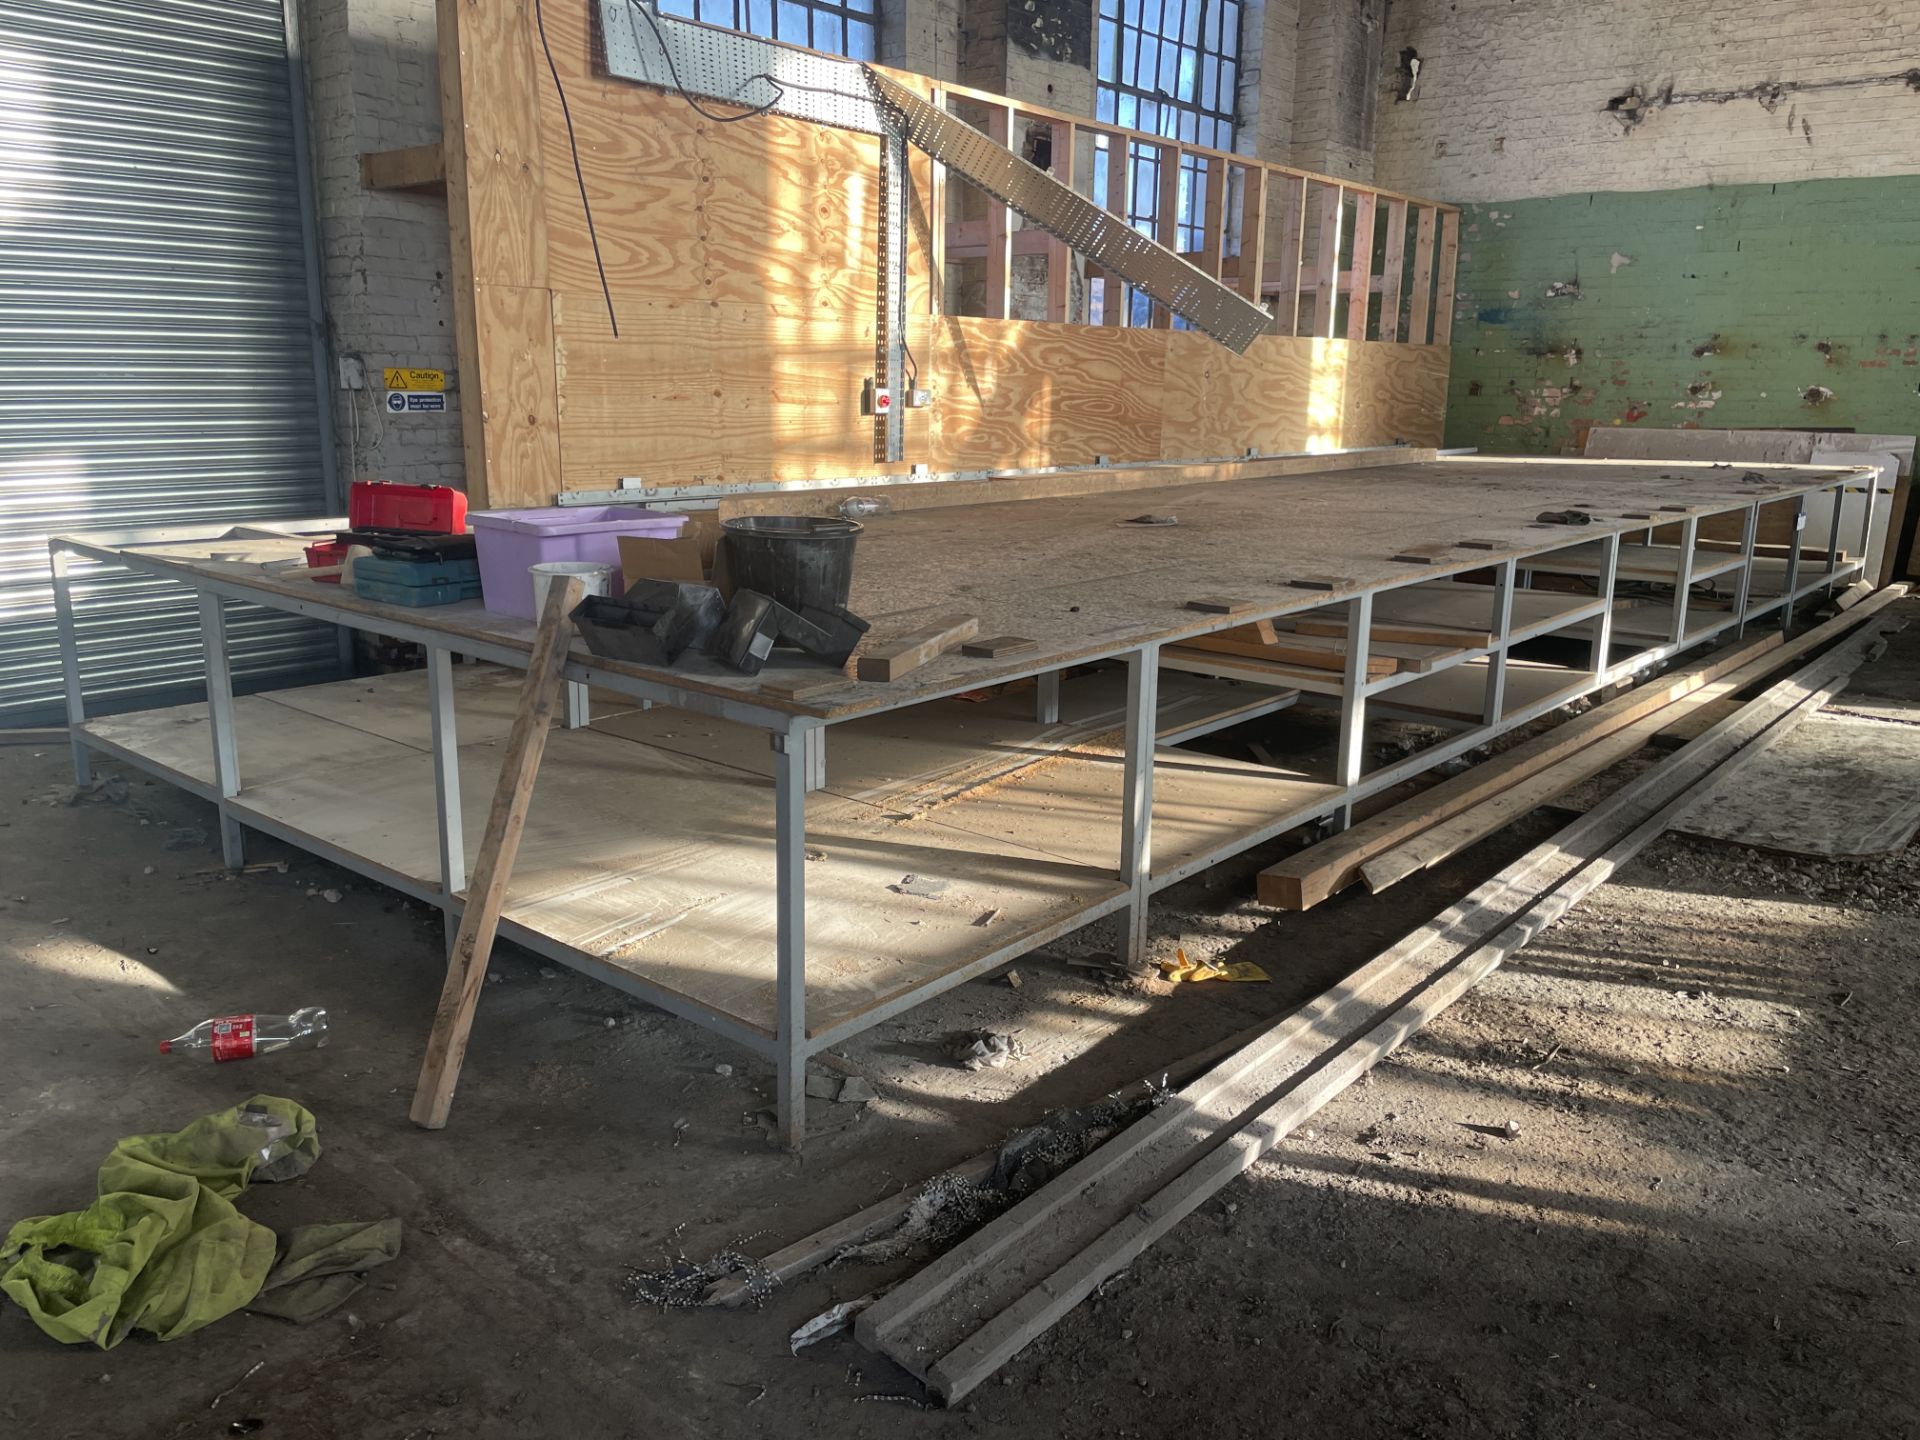 Steel Framed Timber Top Bench, approx. 11m x 3050mm, with roller conveyor framing to rear (